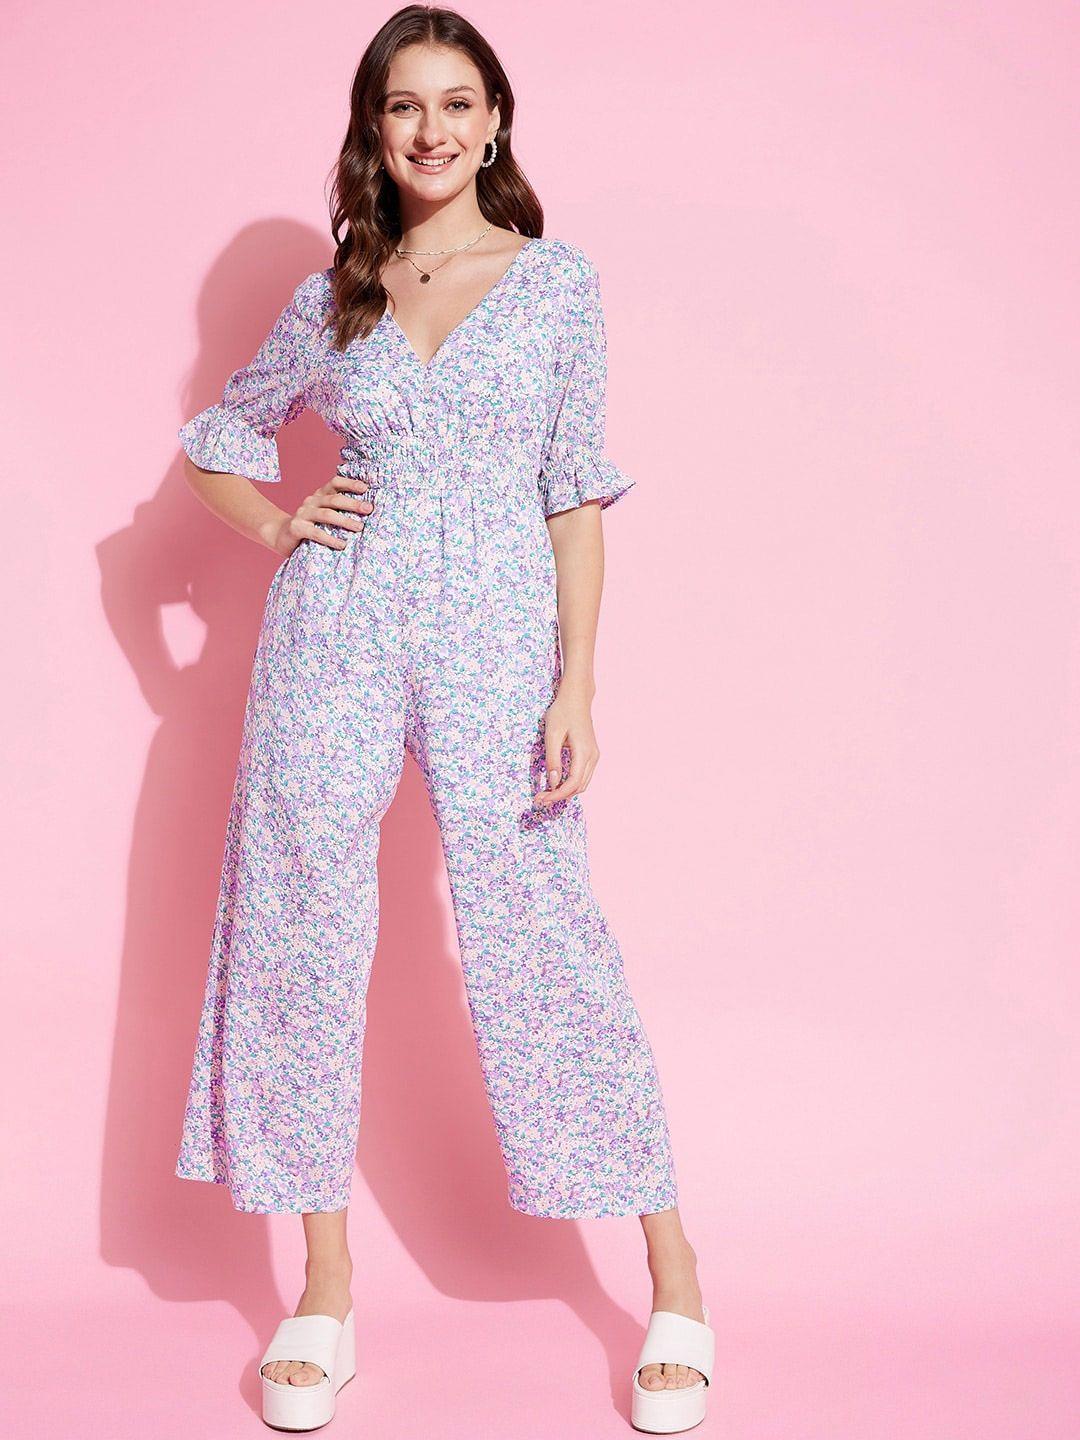 kassually holiyday hype blue & pink floral holiday hype printed waist smocked jumpsuit